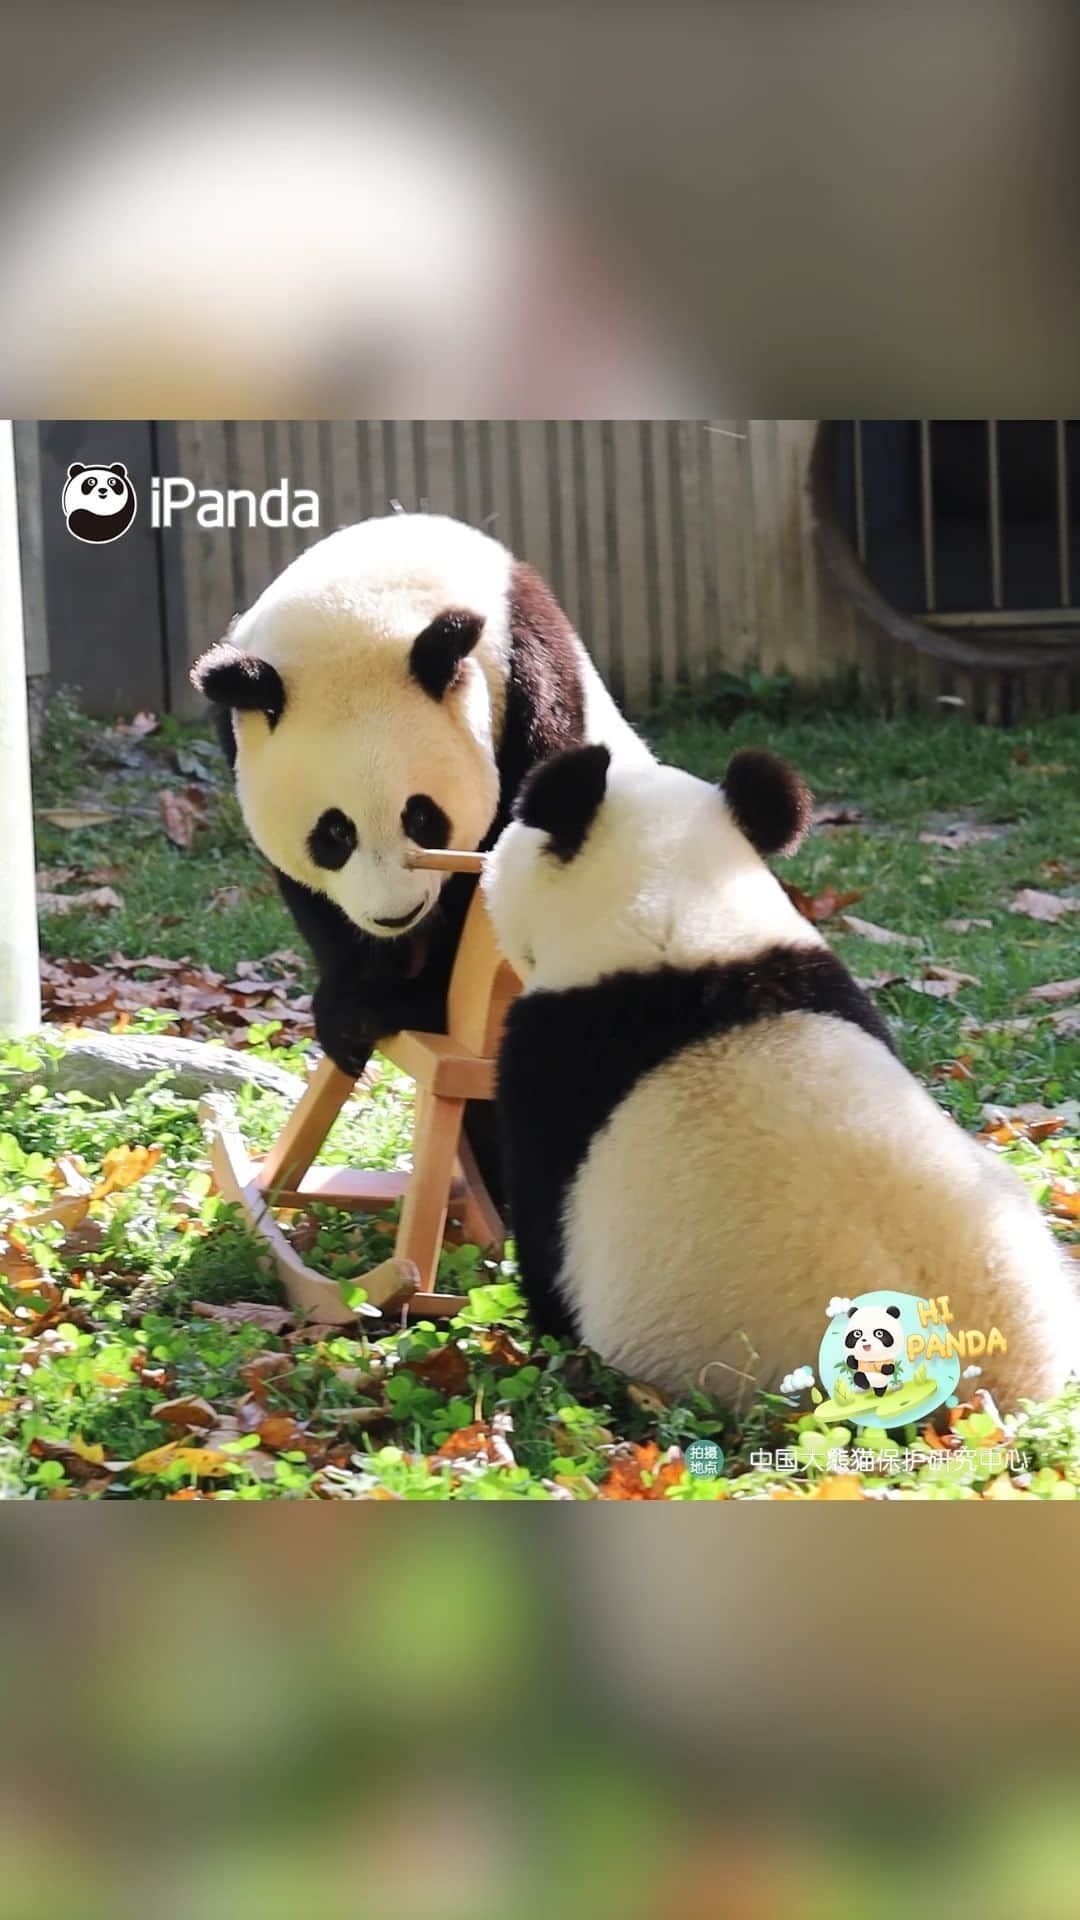 iPandaのインスタグラム：「It will be too squeezy if both of us sit on it. How about me helping you push the rocking horse? (Qing Ci & Ying Hua’s cub) 🐼 🐼 🐼 #Panda #iPanda #Cute #HiPanda #PandaMoment #CCRCGP   For more panda information, please check out: https://en.ipanda.com」